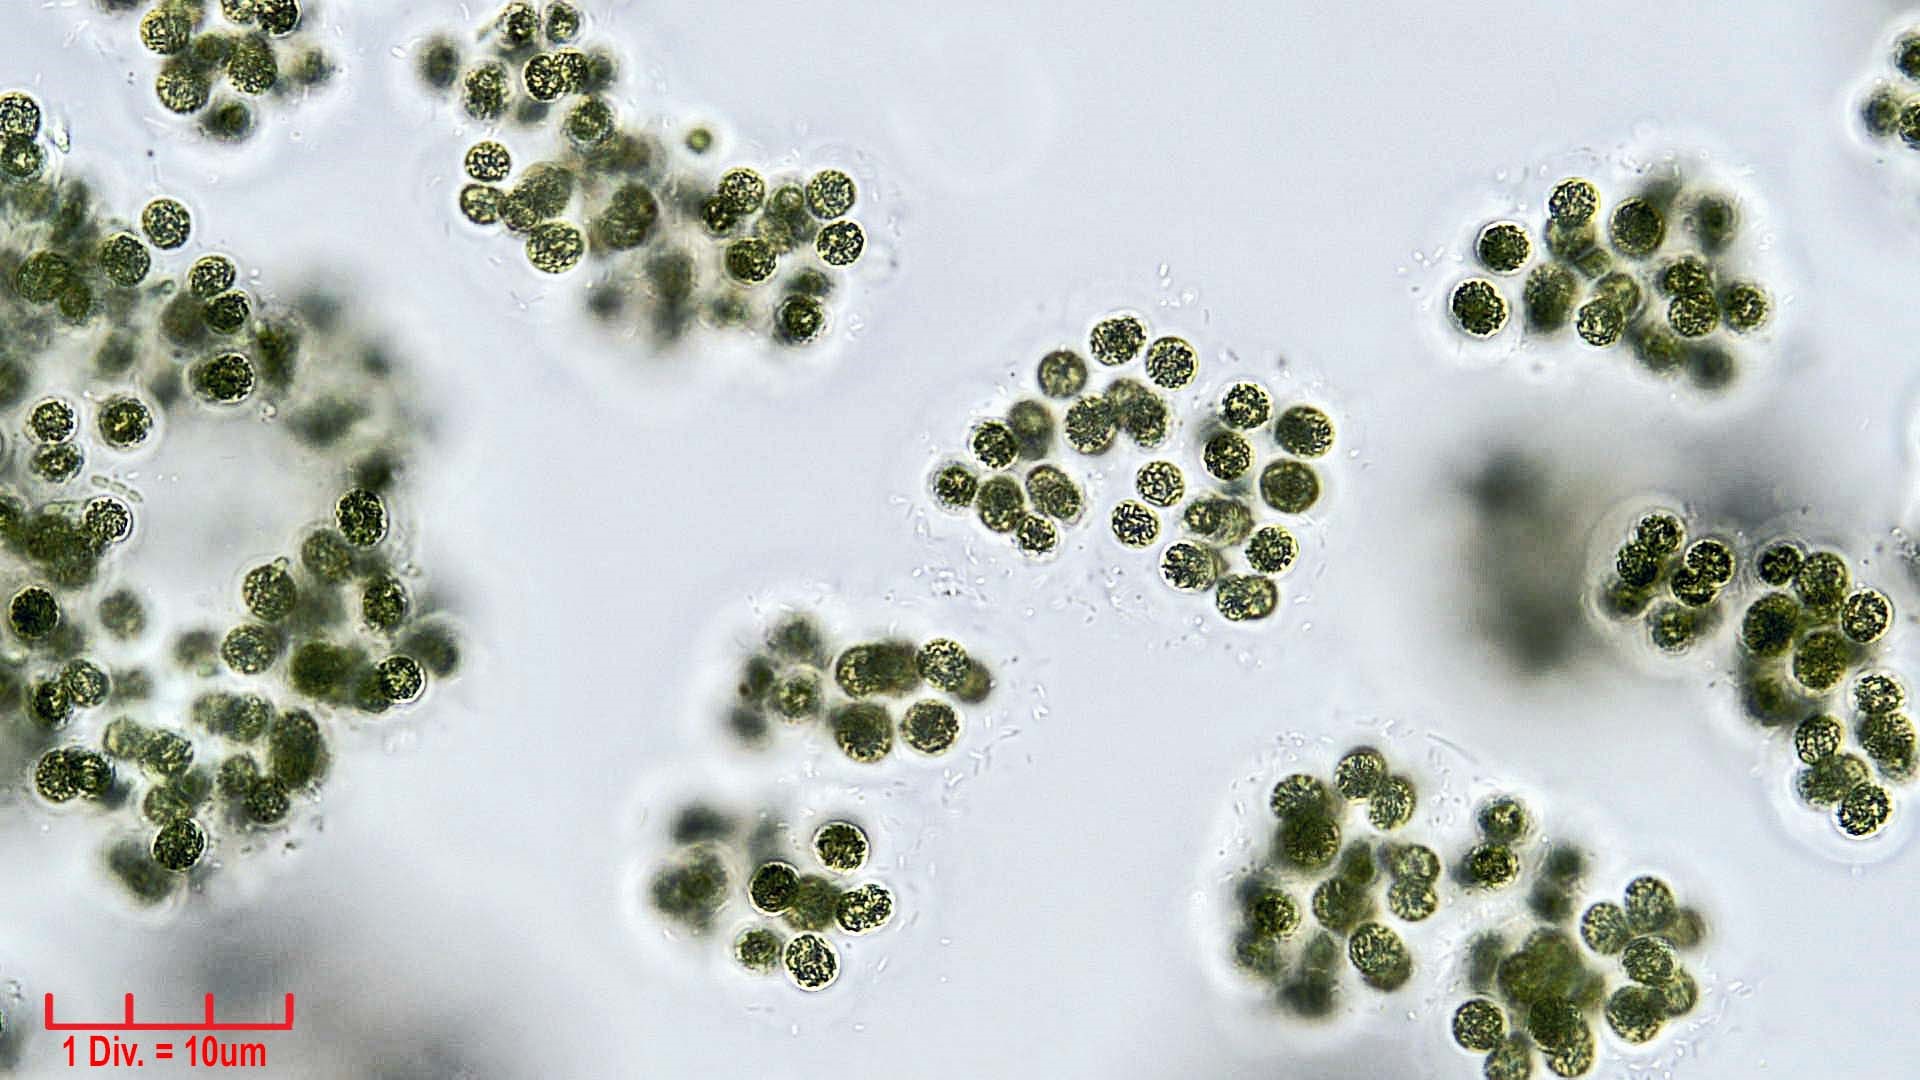 ./Cyanobacteria/Chroococcales/Microcystaceae/Microcystis/viridis/microcystis-viridis-67.jpg